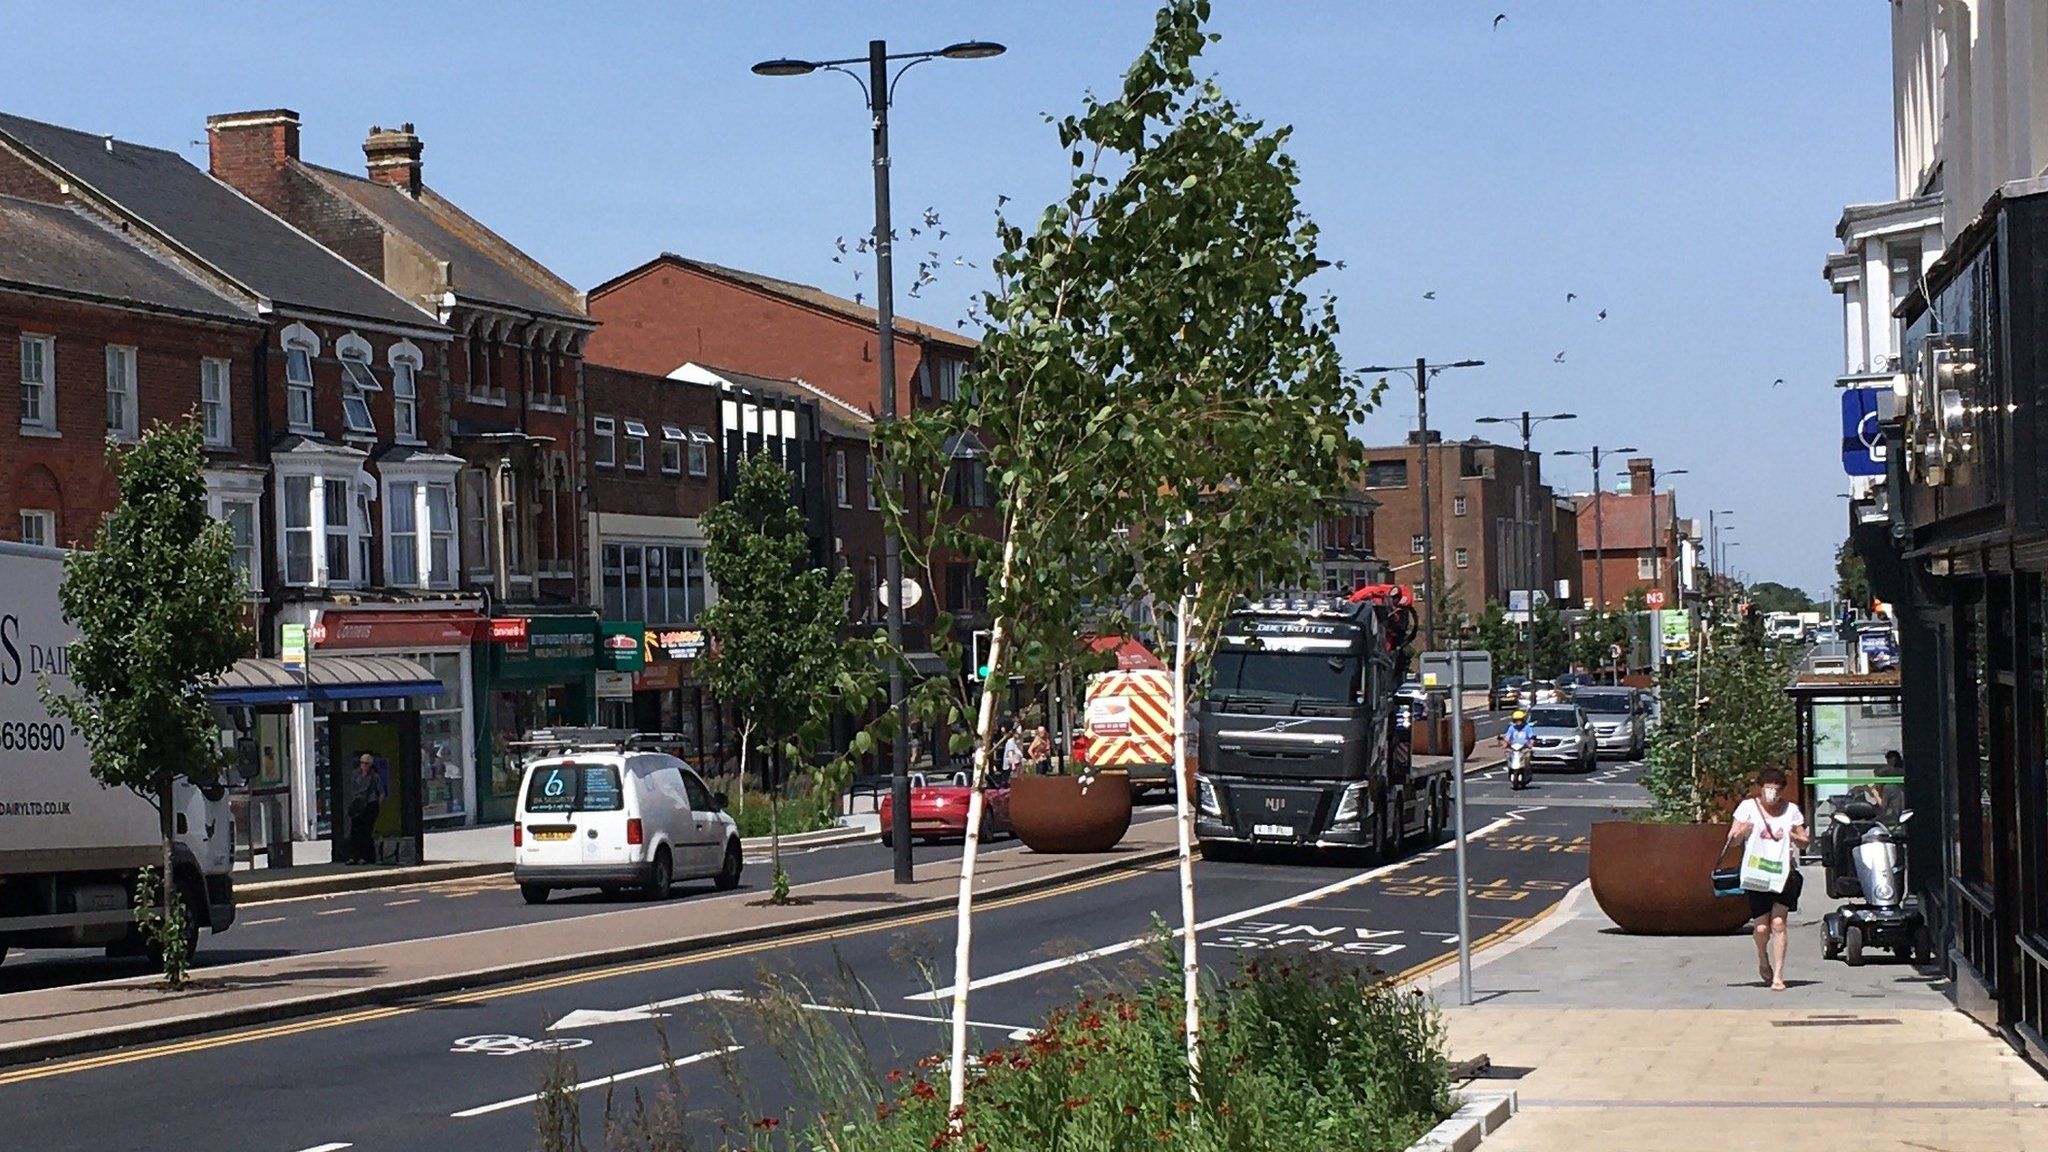 Renovated Dunstable High Street, in Bedfordshire